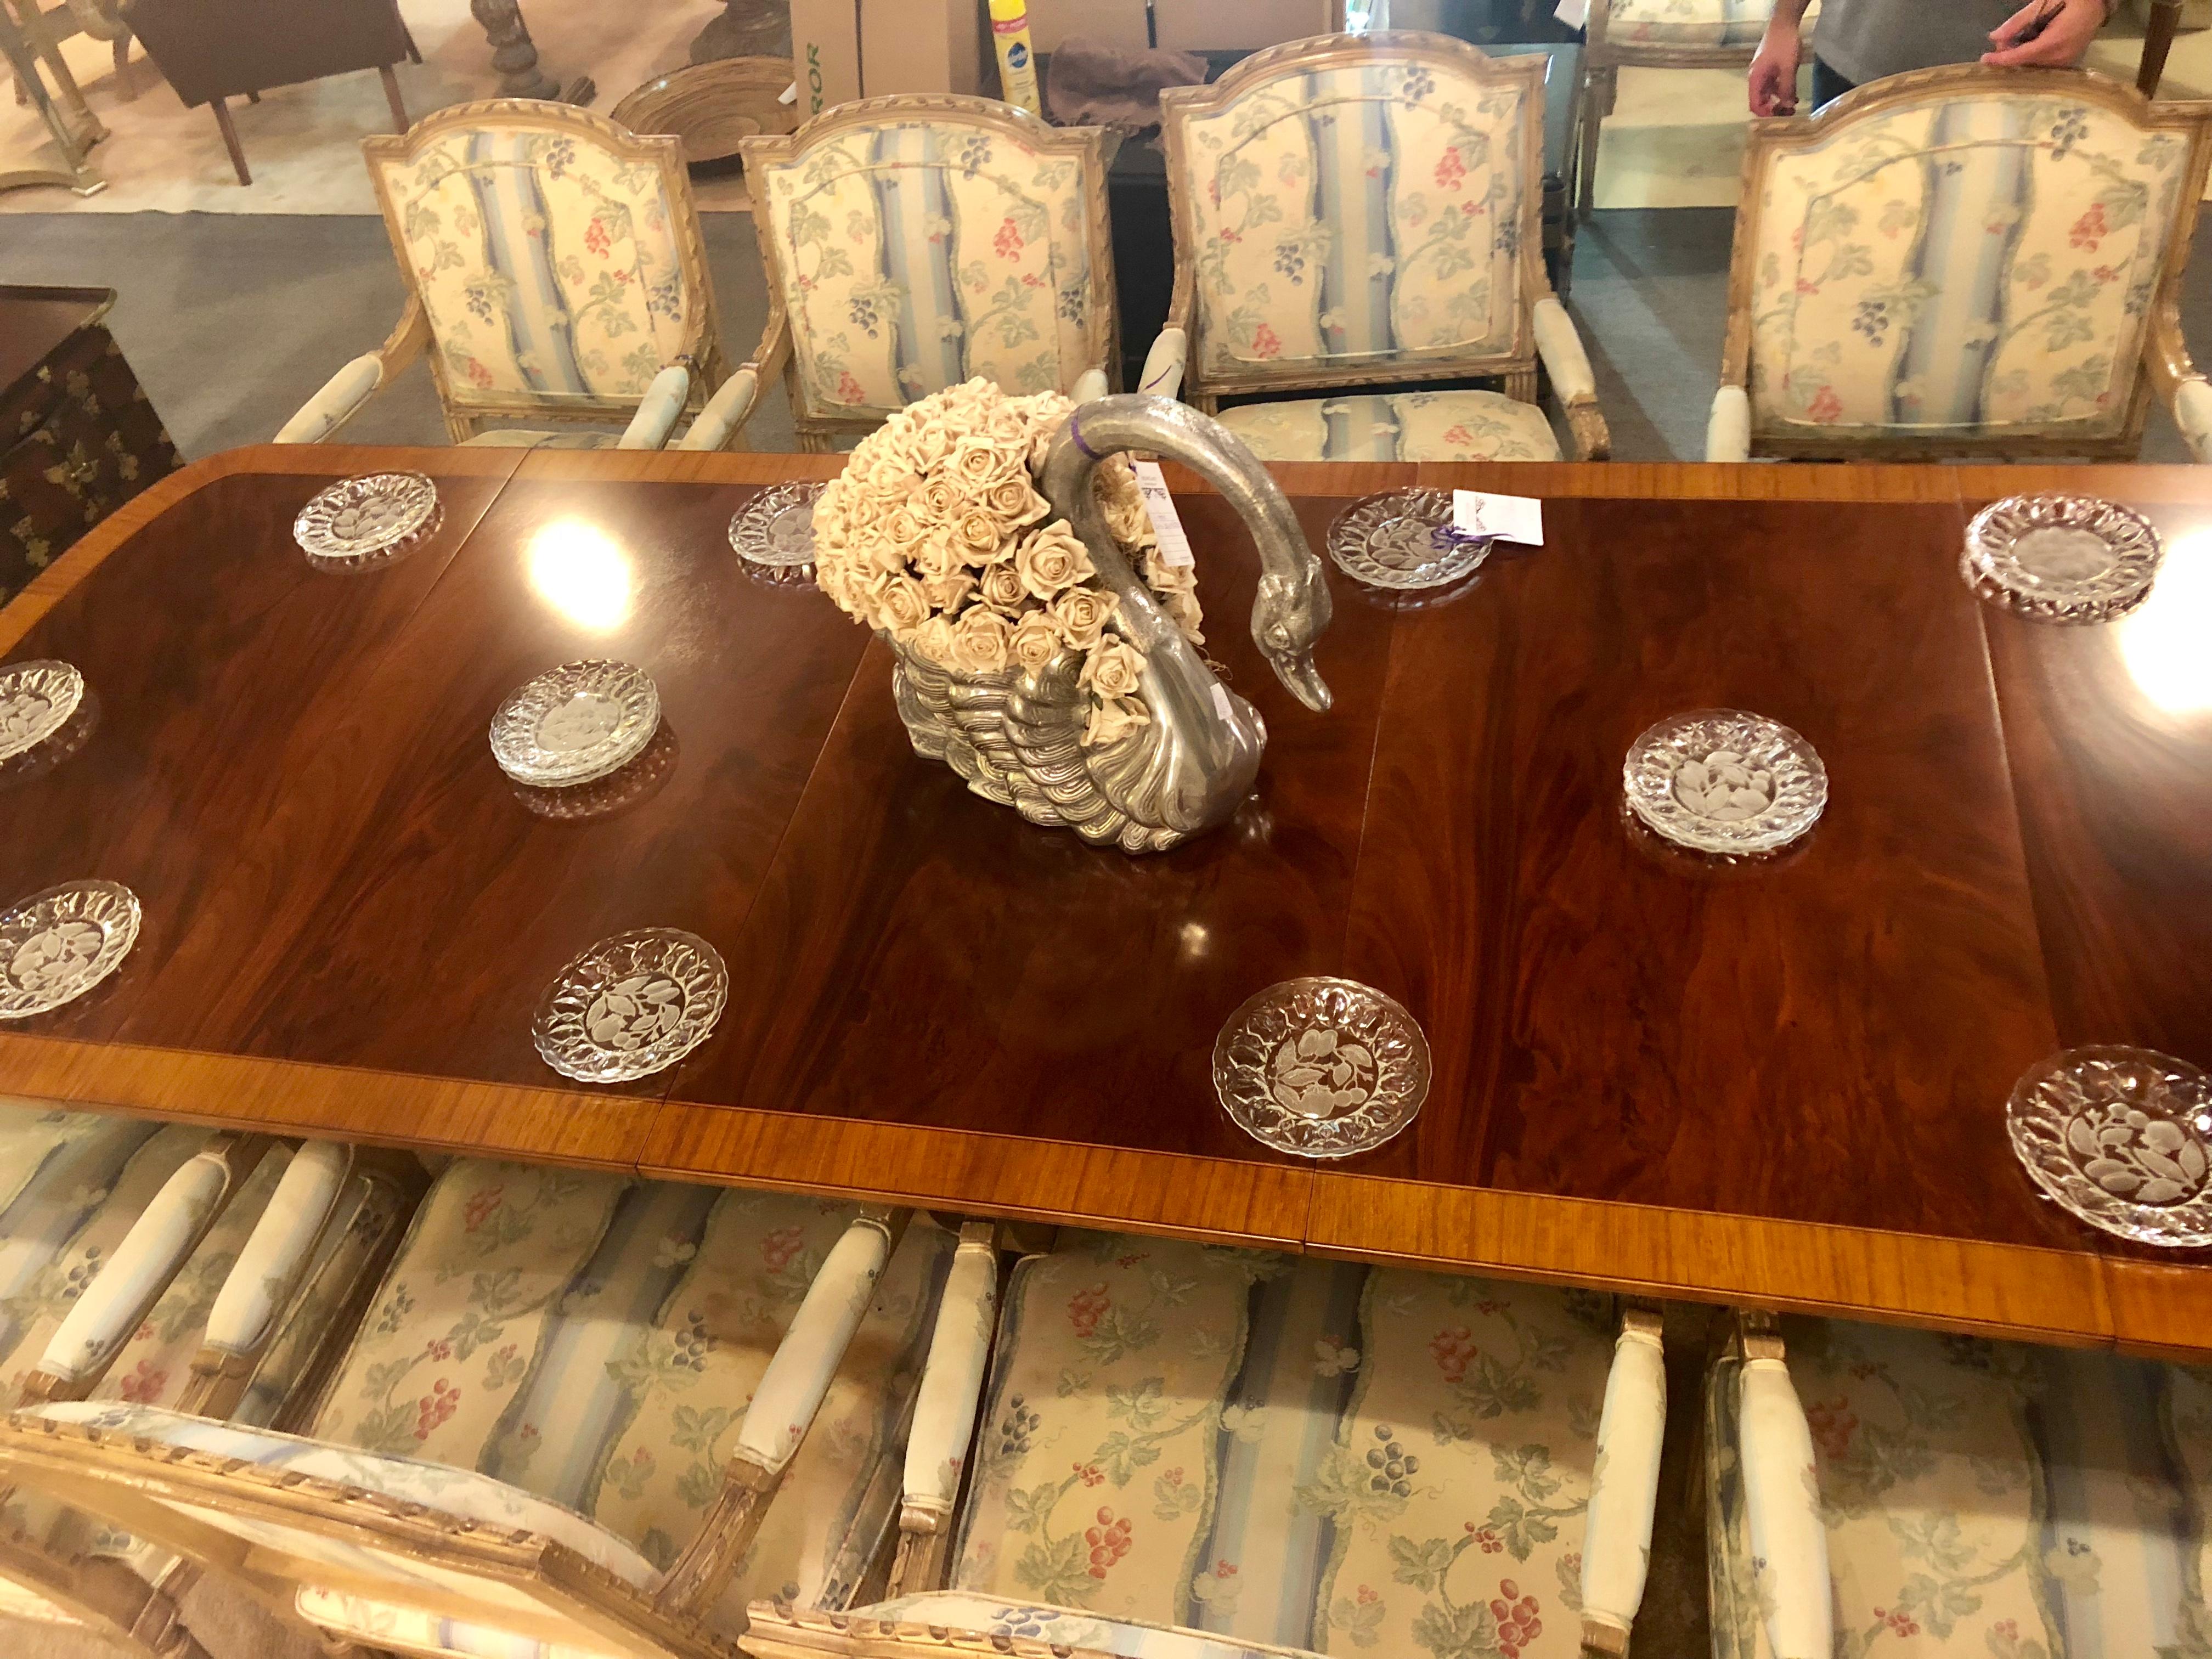 A fully refinished crotch mahogany satin wood banded triple pedestal Regency style dining table having four leaves. This simply stunning and multi versatile dining table is six feet in length and fully extends to multiple sizes having two 24 inch